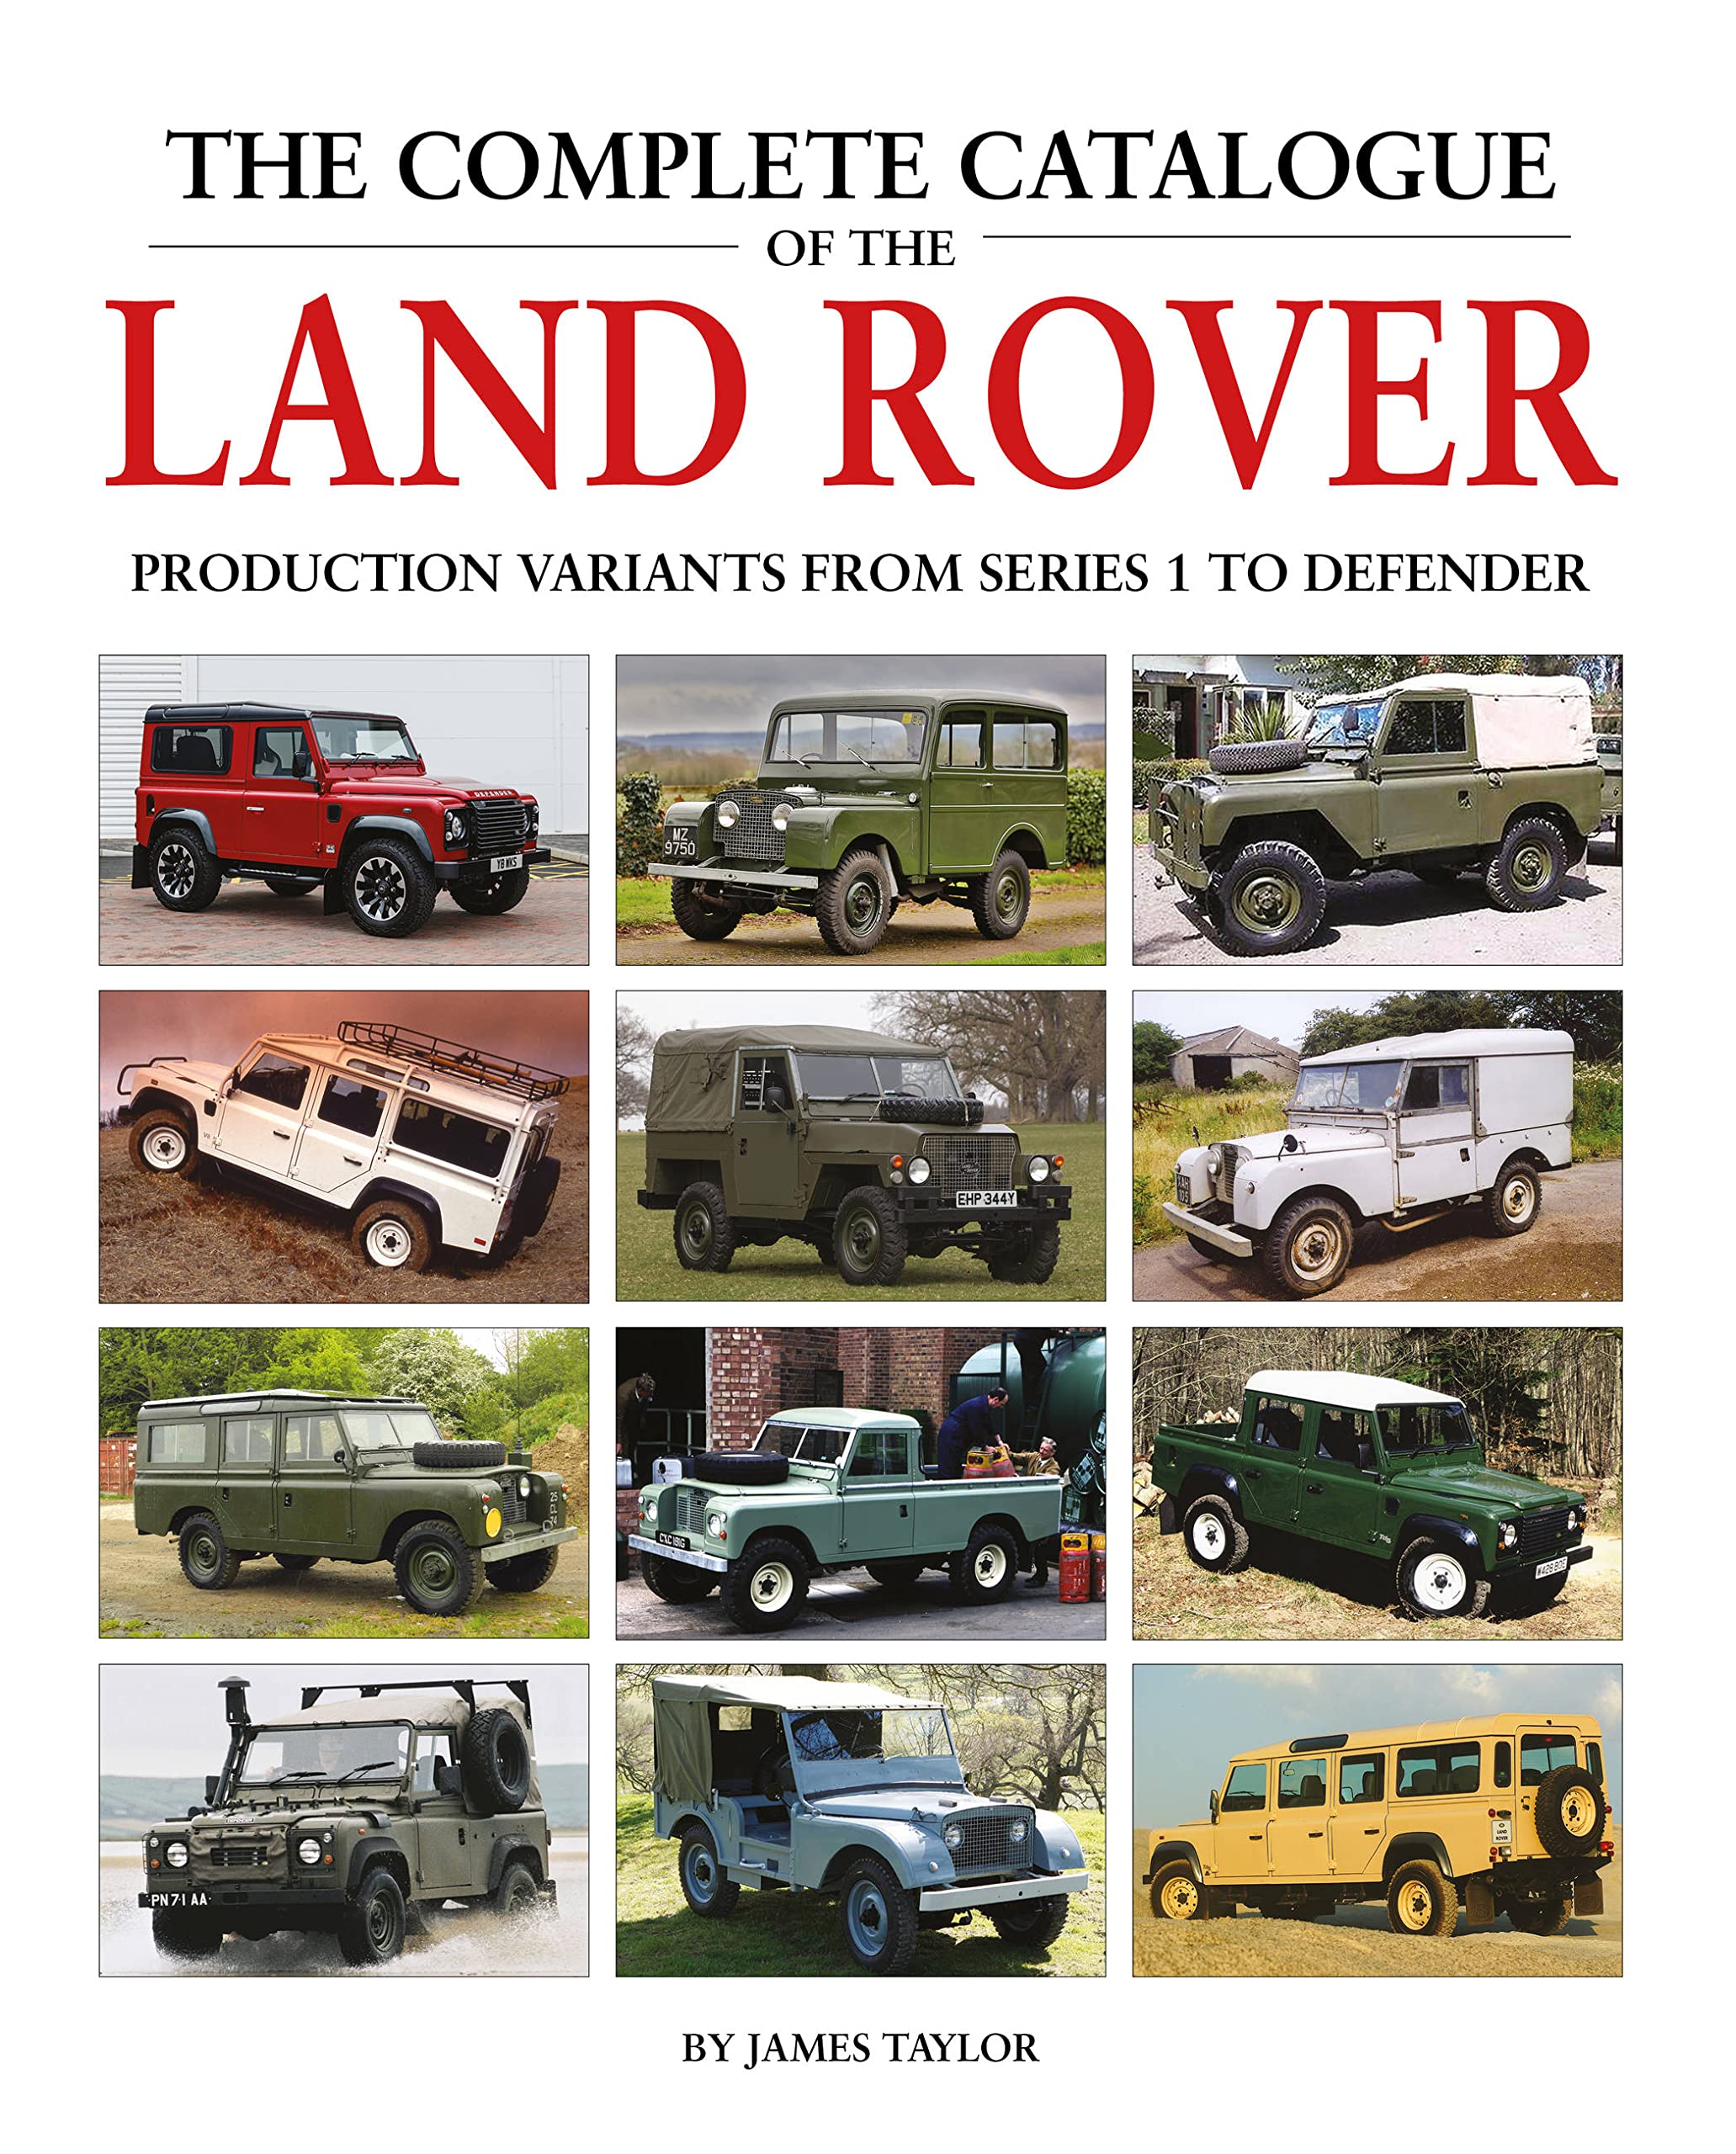 The complete catalogue of the LAND ROVER production variants from series 1 to defender